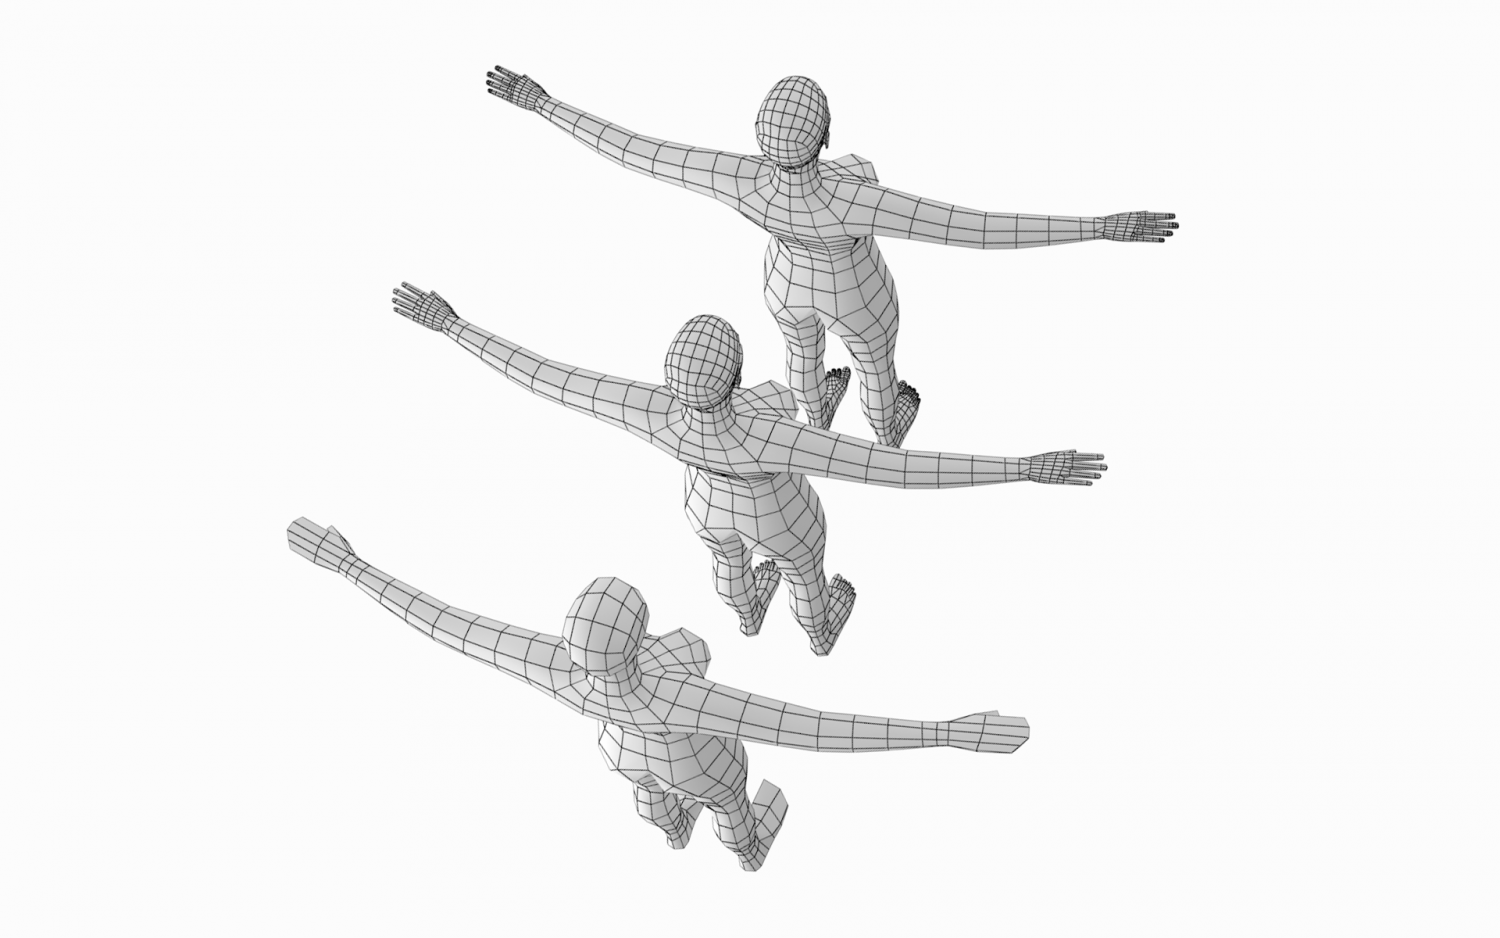 Why is the 'T-Pose' the default pose used when animating 3D models? Why is  this pose easier to work with than others? - Quora